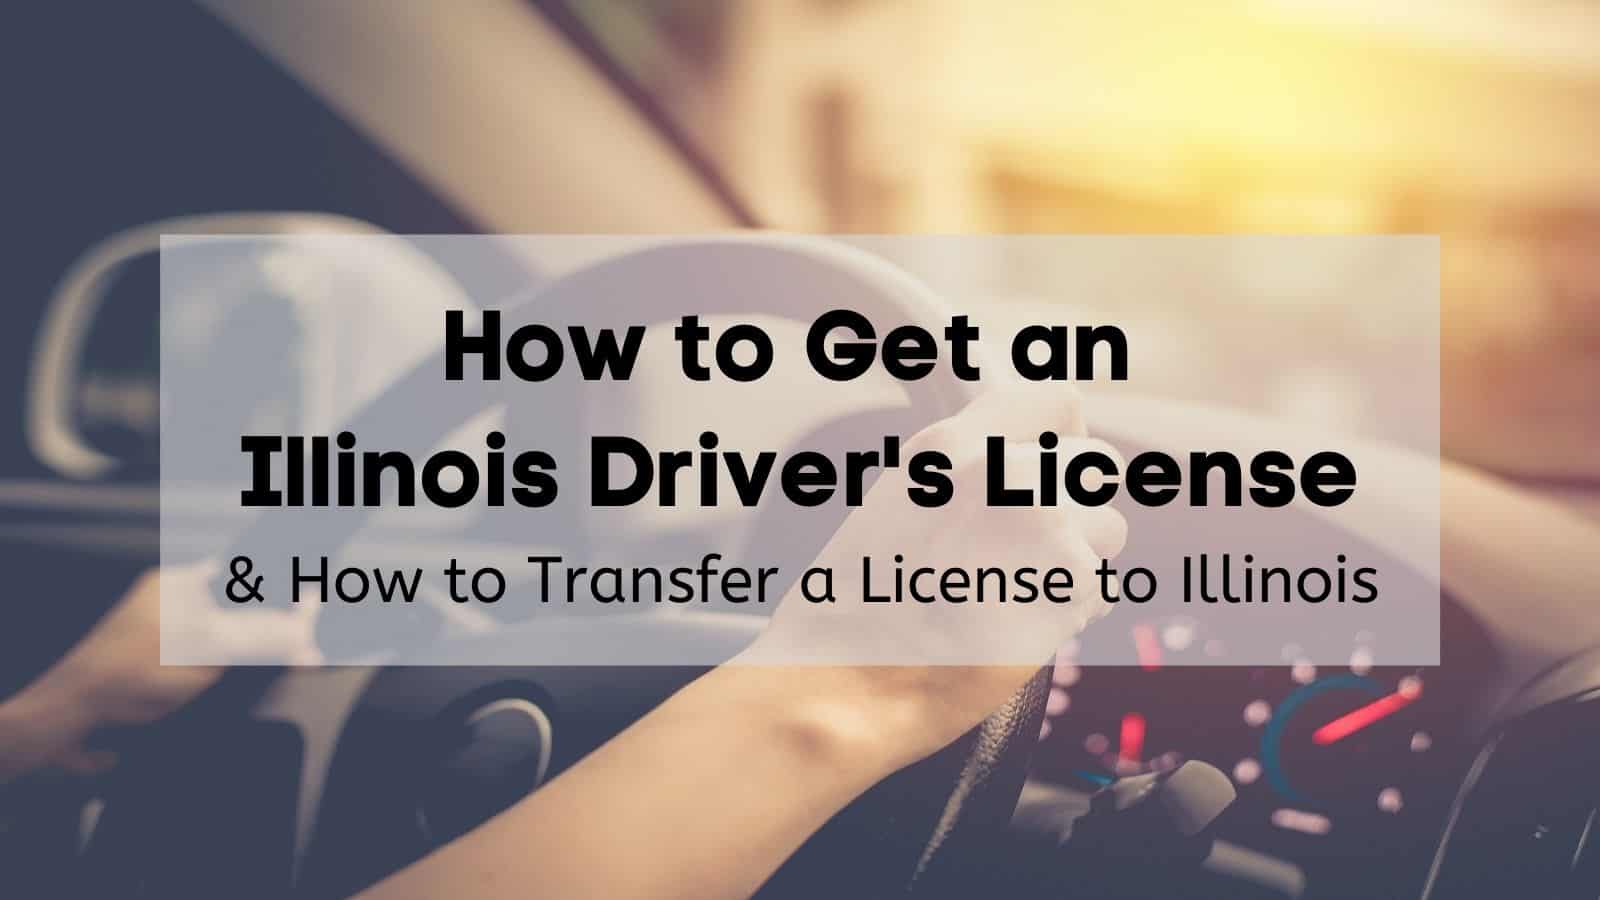 how to renew my driver license in illinois